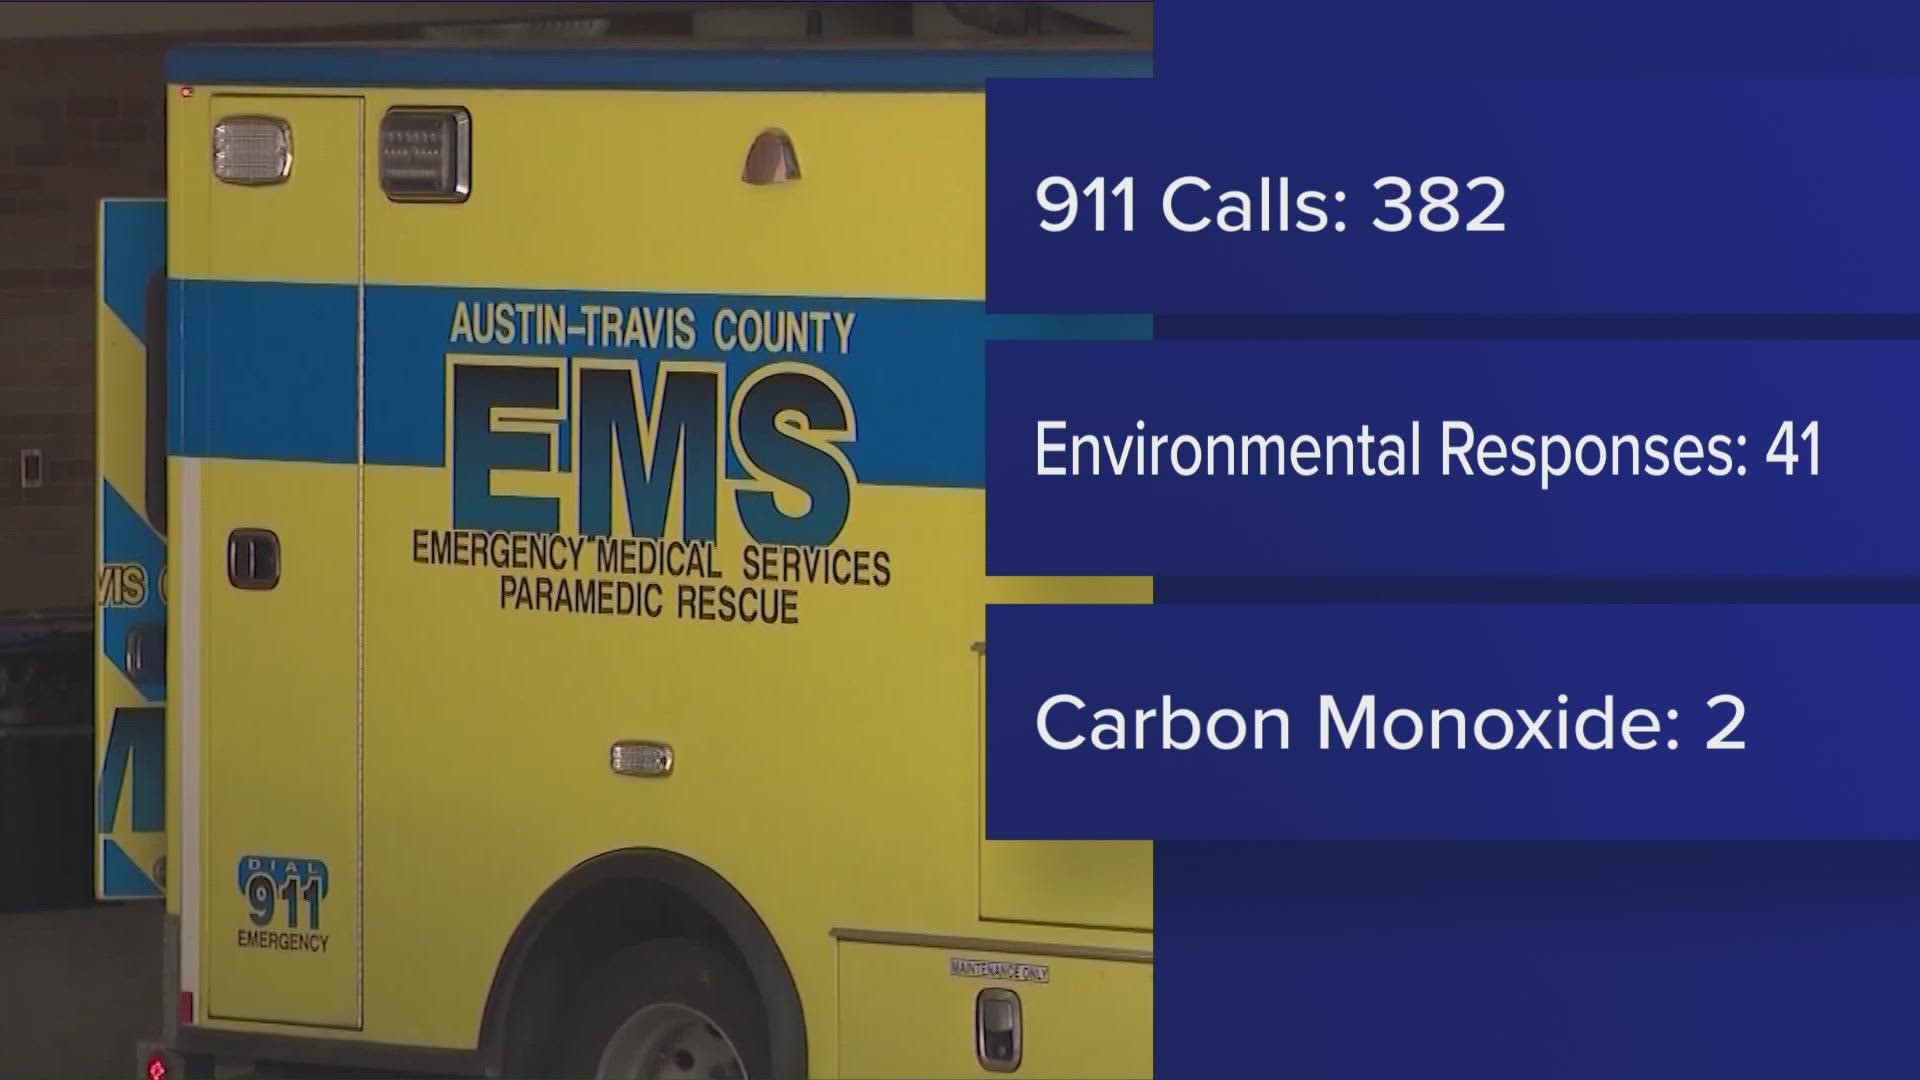 From midnight to midnight on Friday, ATCEMS responded to 41 environmental incident response calls and 24 cold weather shelter transport calls.